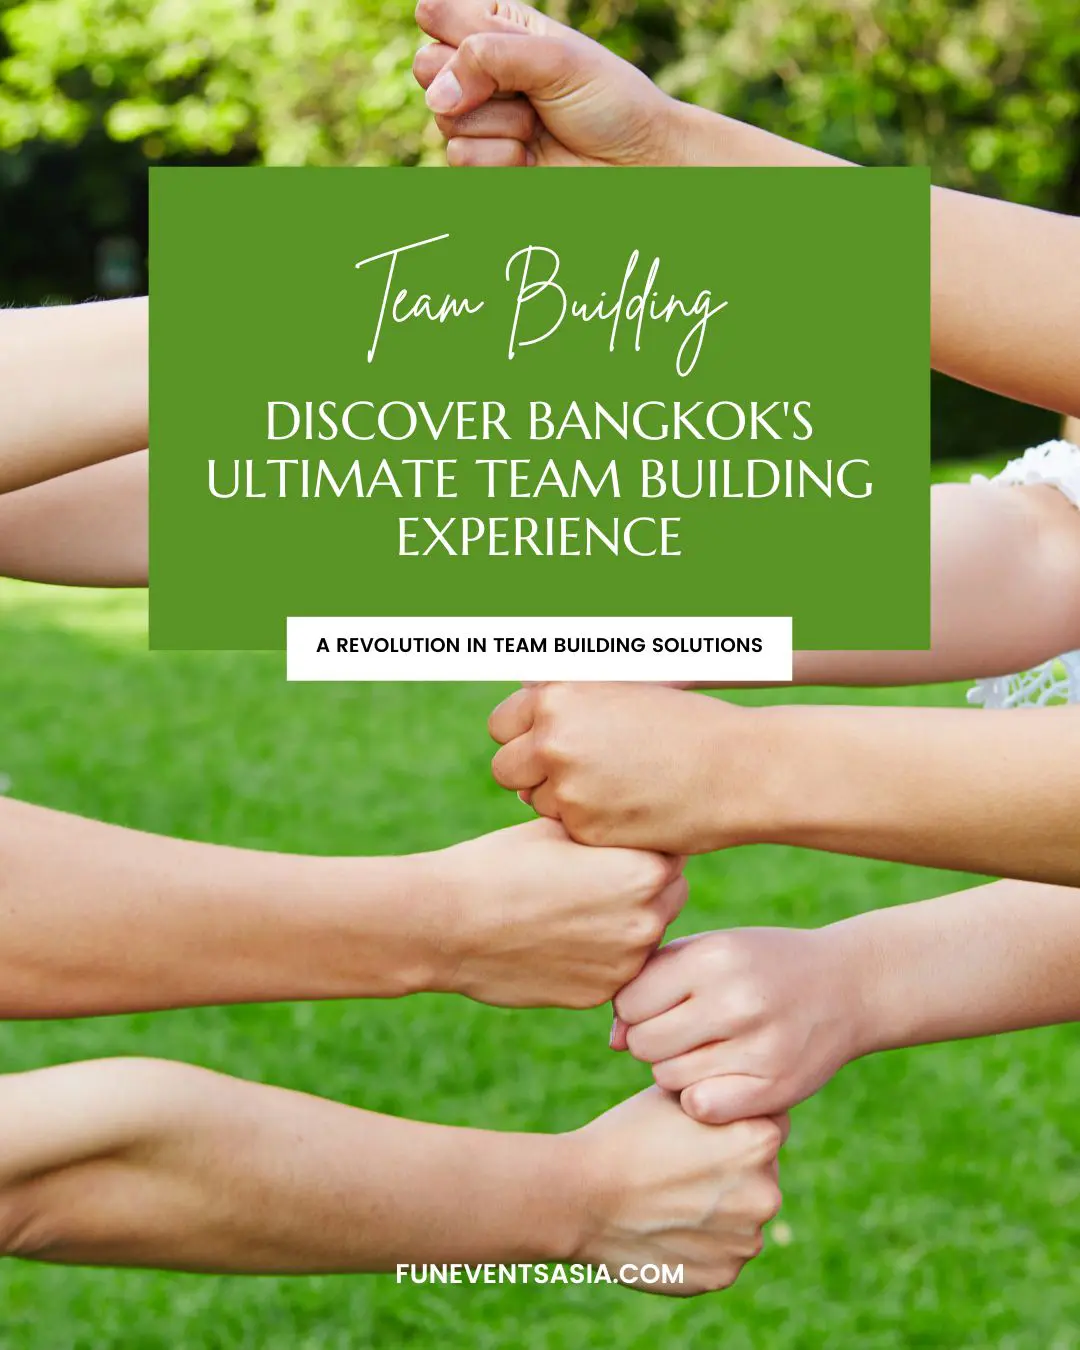 Discover Bangkok's Ultimate Team Building Experience